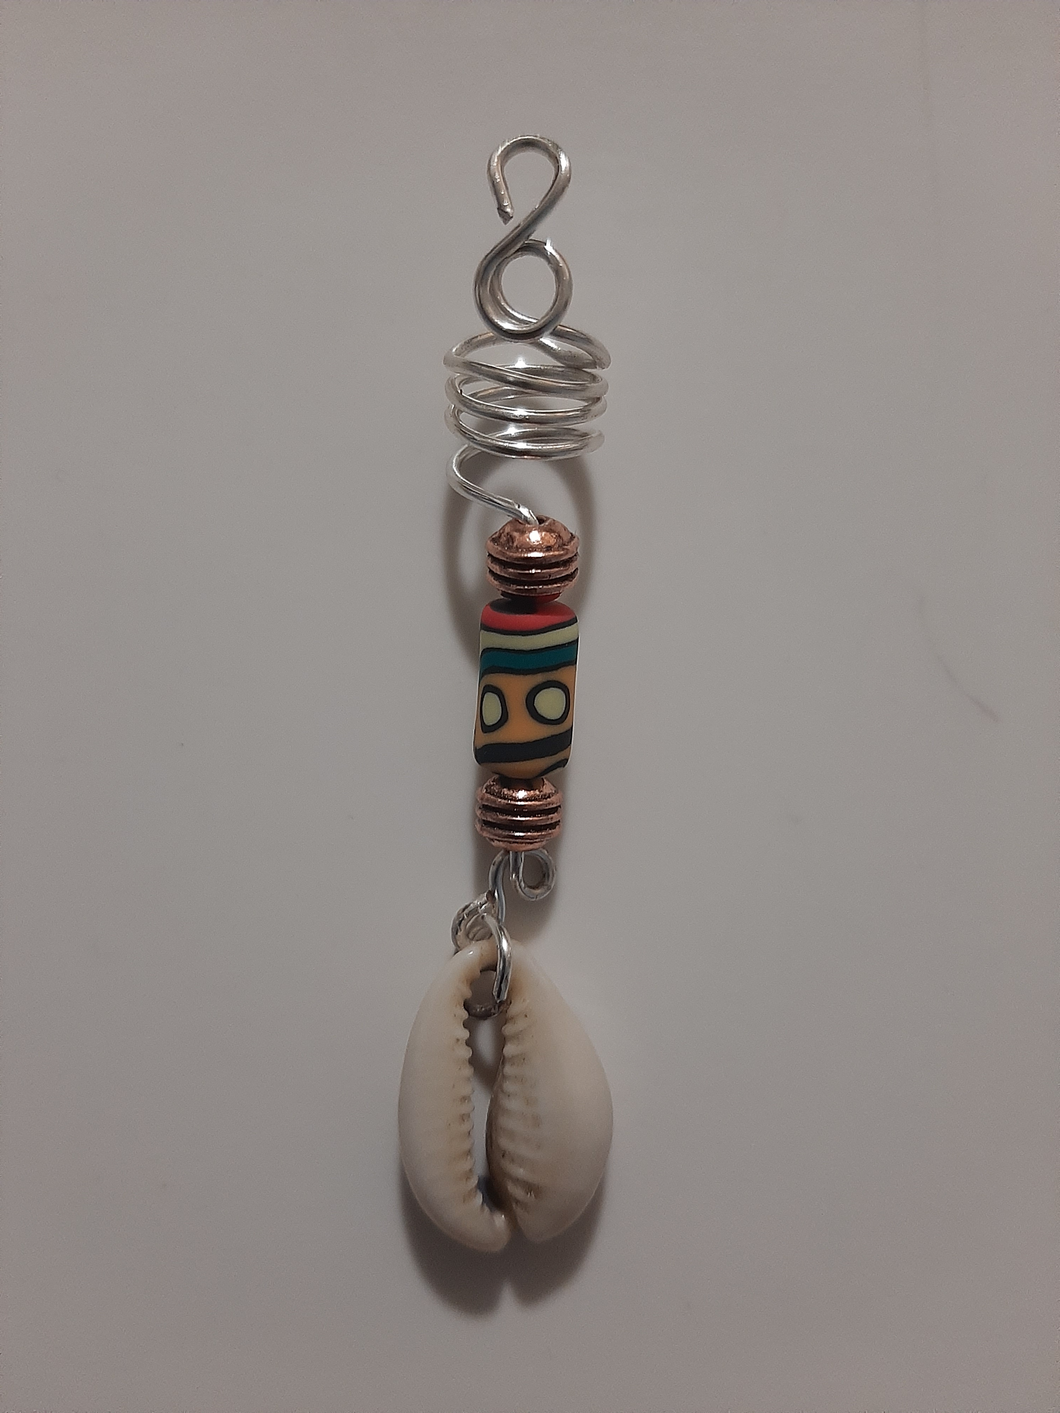 Loc Jewelry with African Inspired Accent Piece + Cowrie Shell Charm